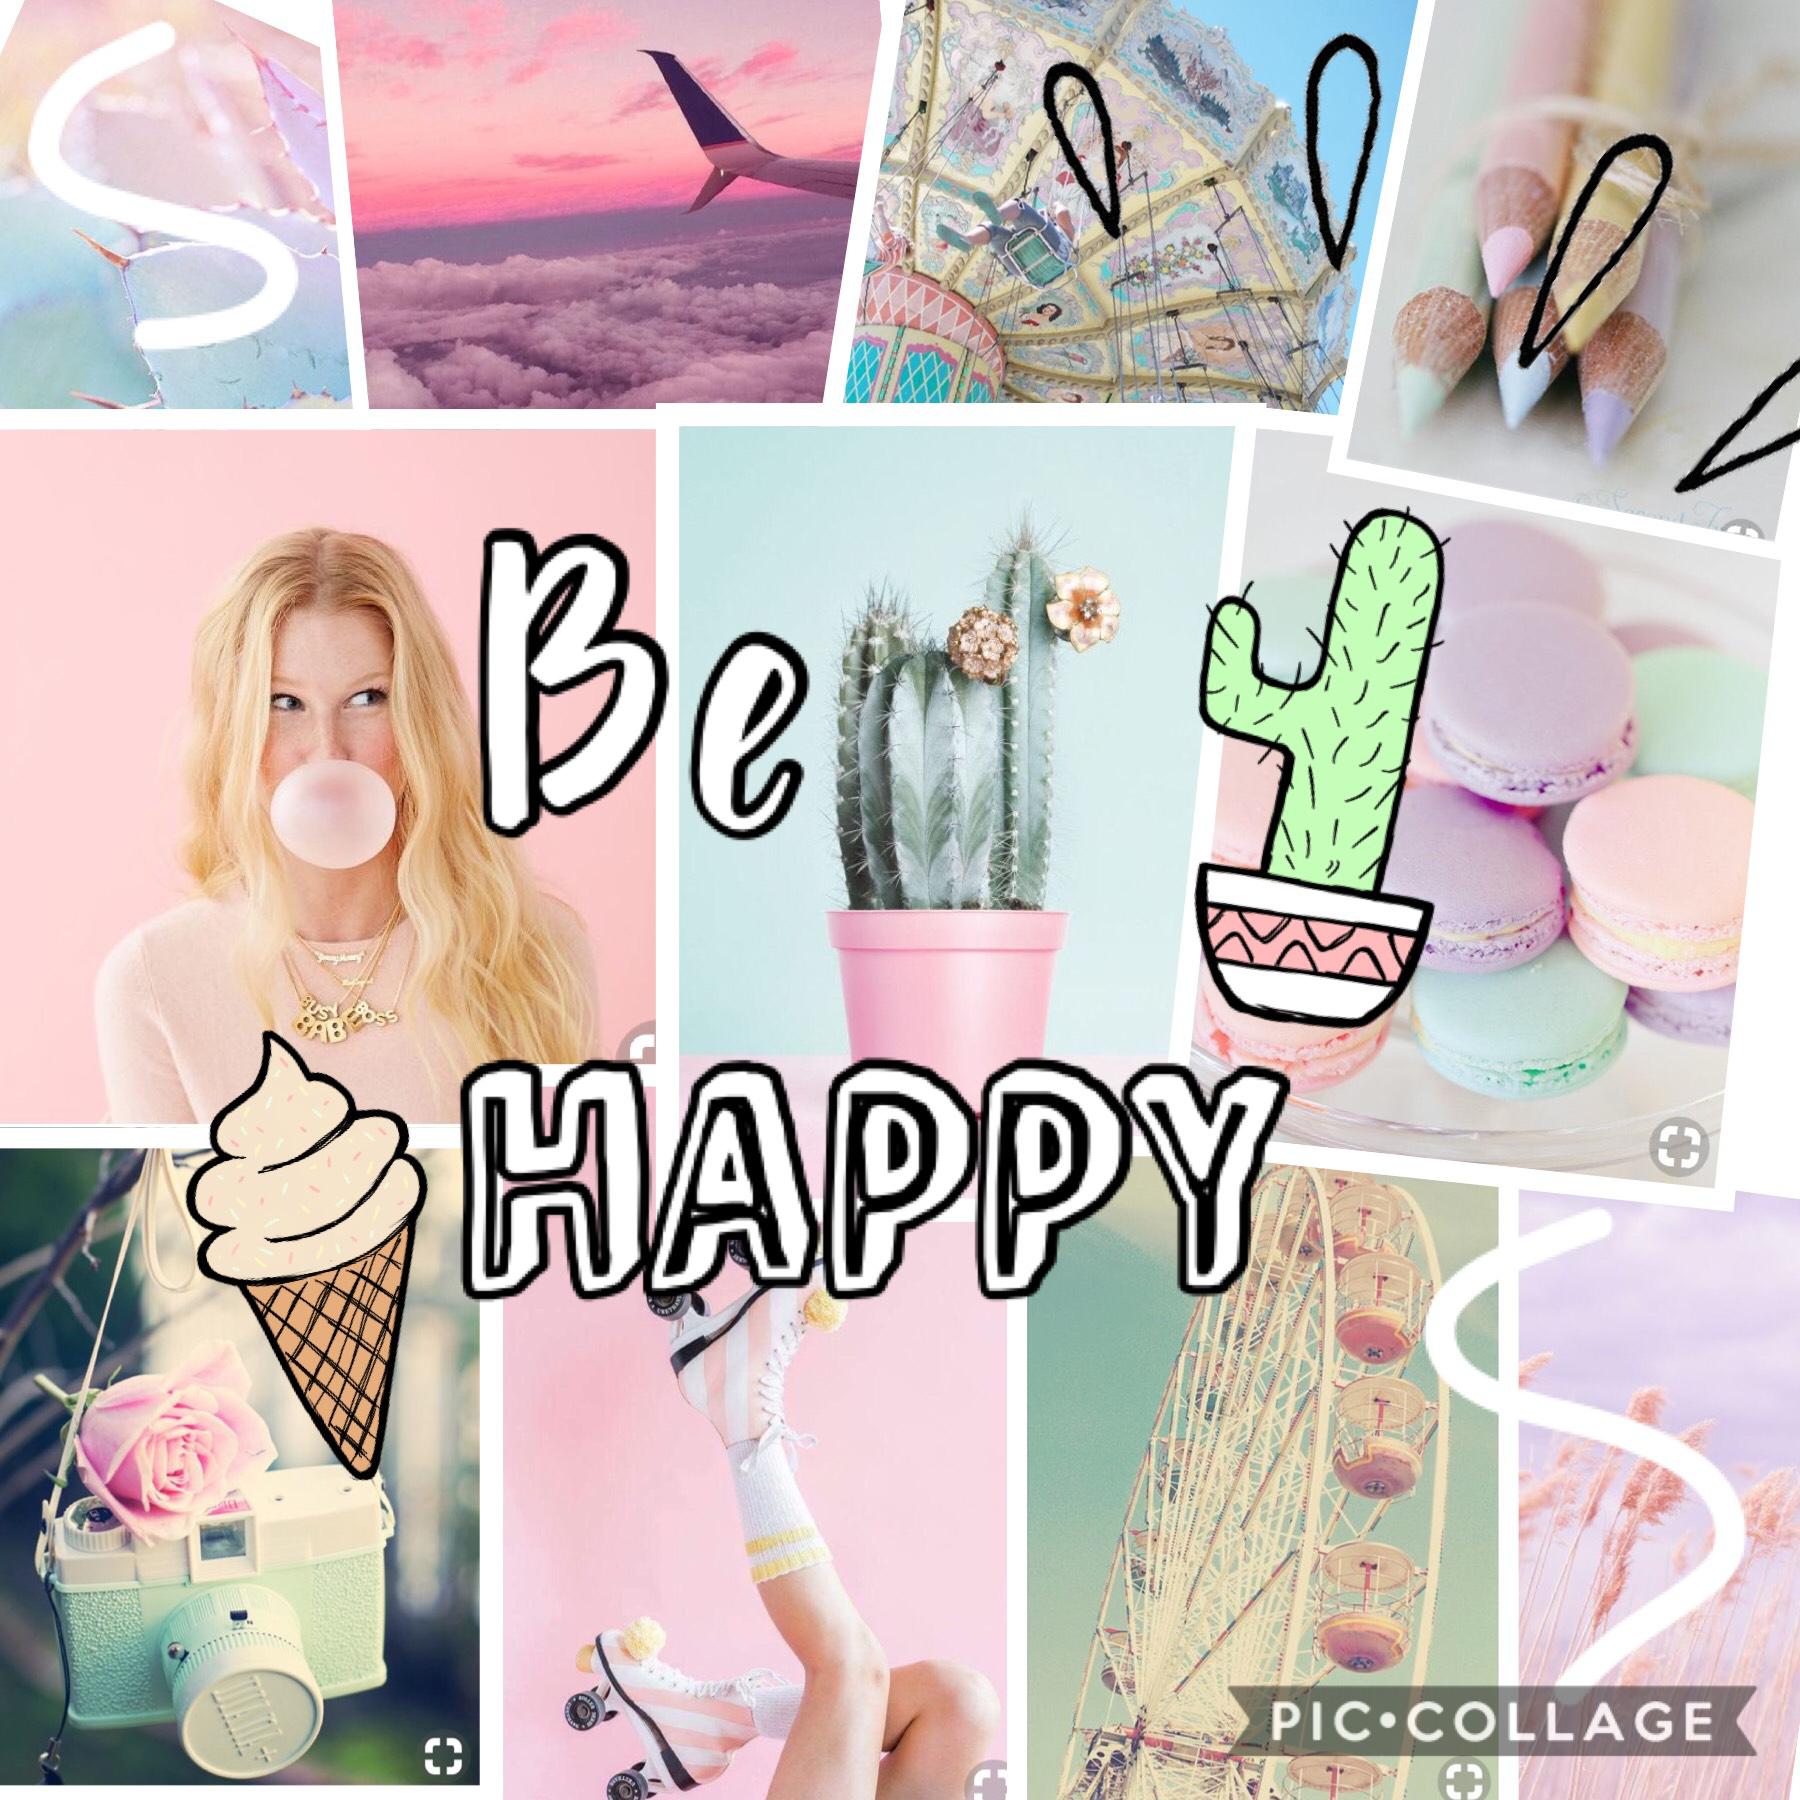 🌵tap🌵

•BE HAPPY•

•Hey thanks to everyone who is following me•
 
If you could get me 100 followers that would be great😊